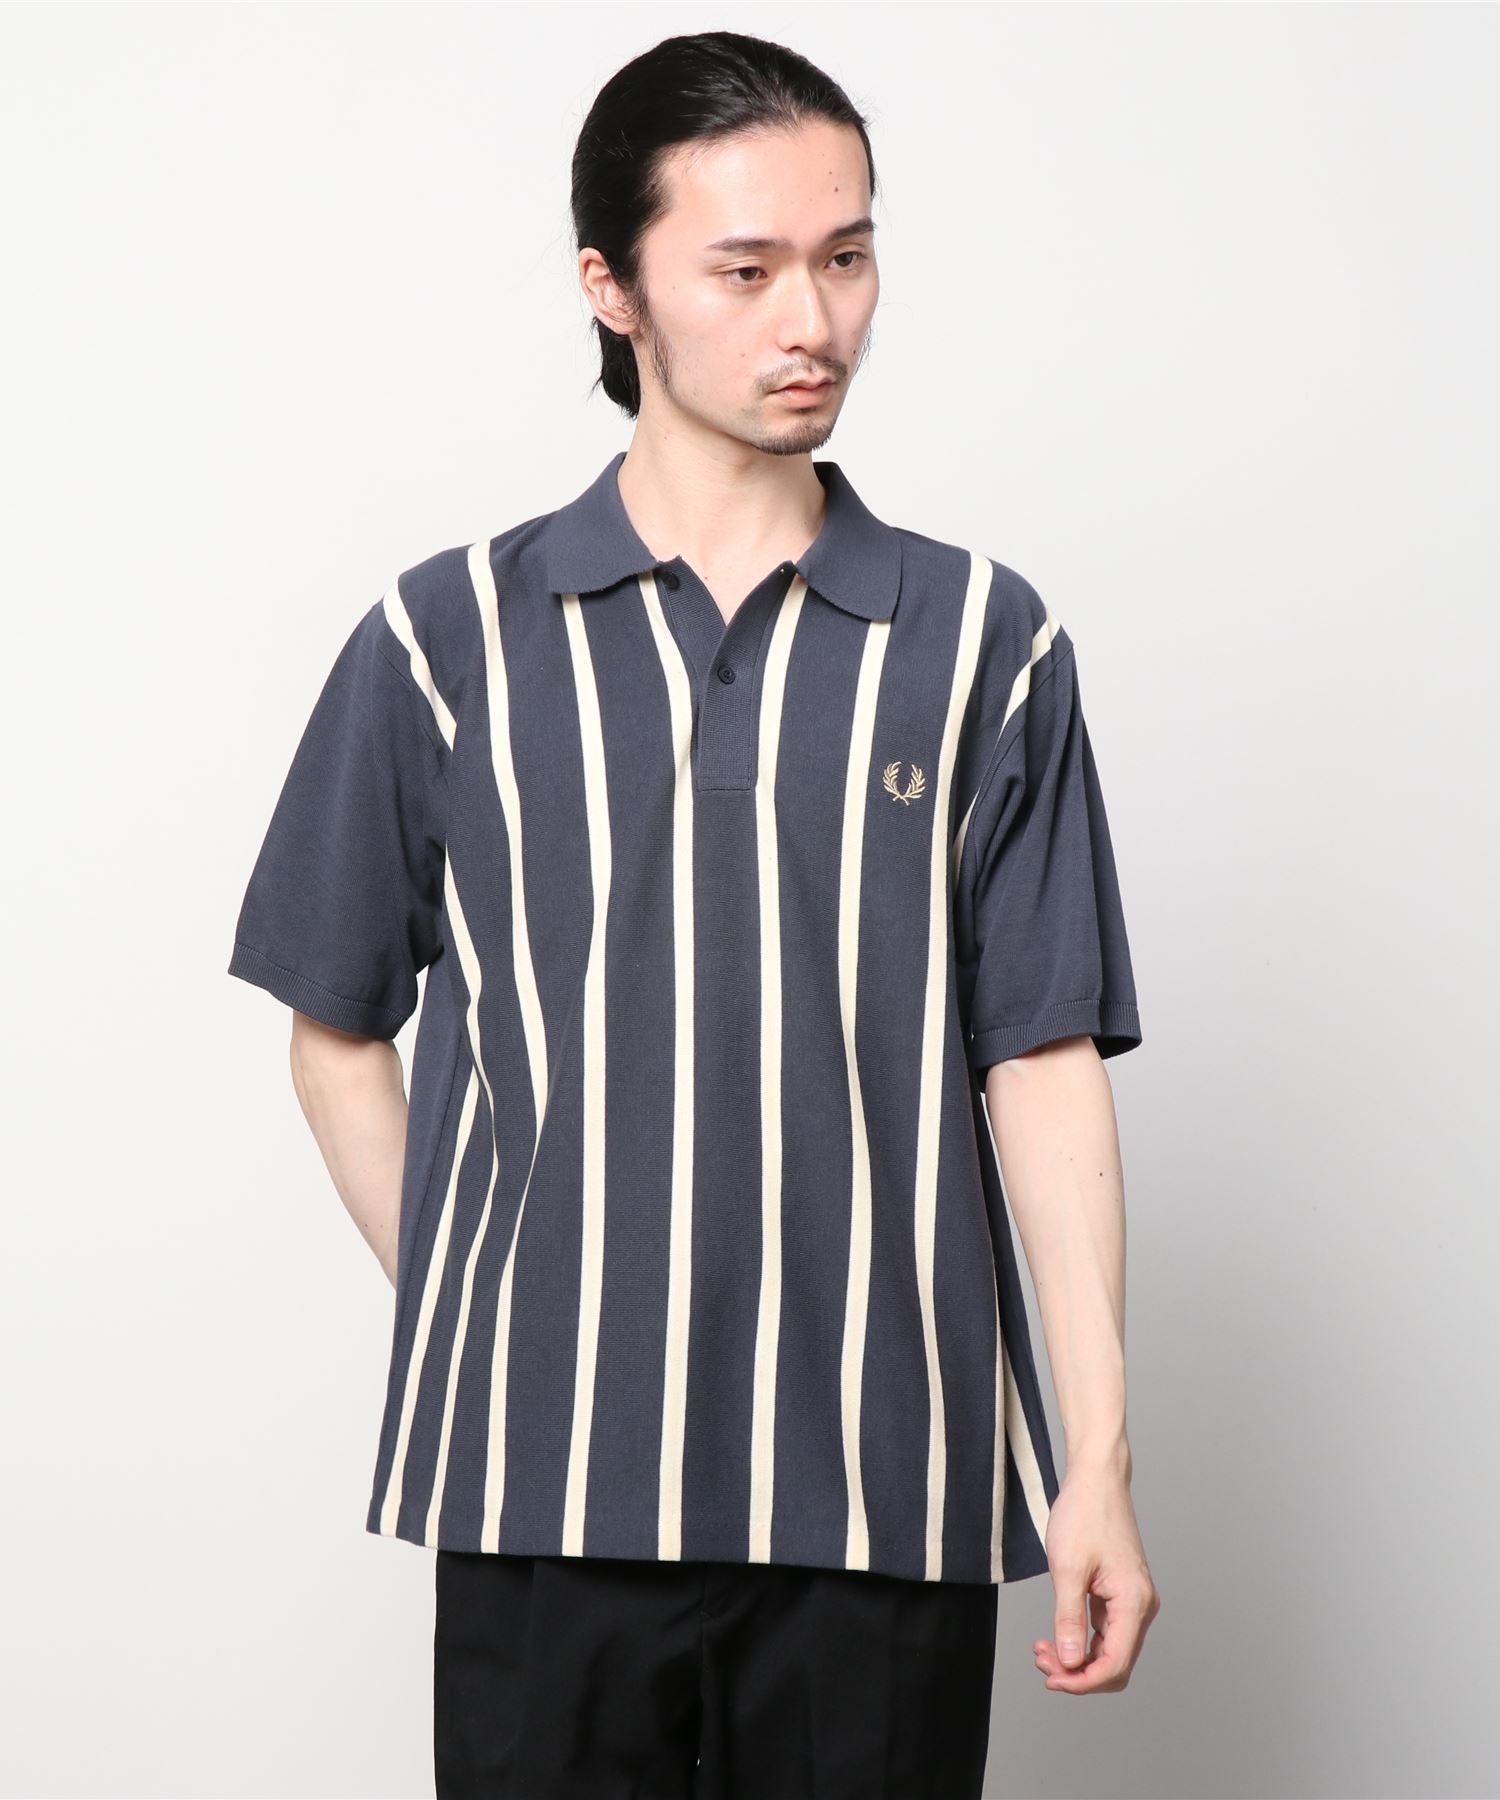 FRED PERRYKnitted Shirt Stripe SALE 今季も再入荷 56%OFF